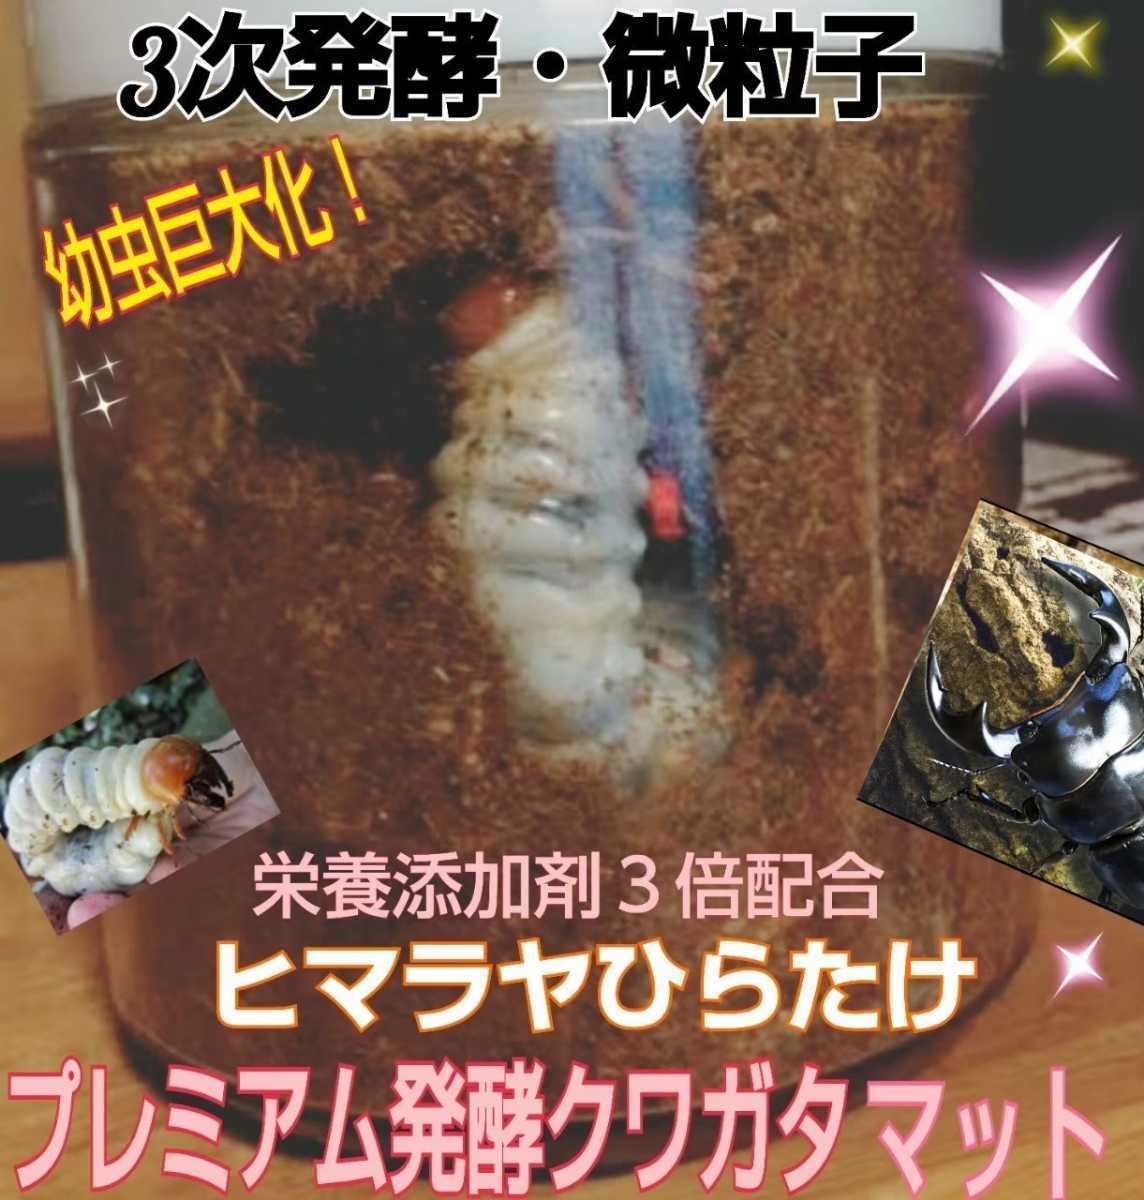  evolved! special selection premium 3 next departure . stag beetle mat * nutrition addition agent * symbiosis bacteria 3 times combination * Anne te* Miyama * common ta*nijiiro* saw .!